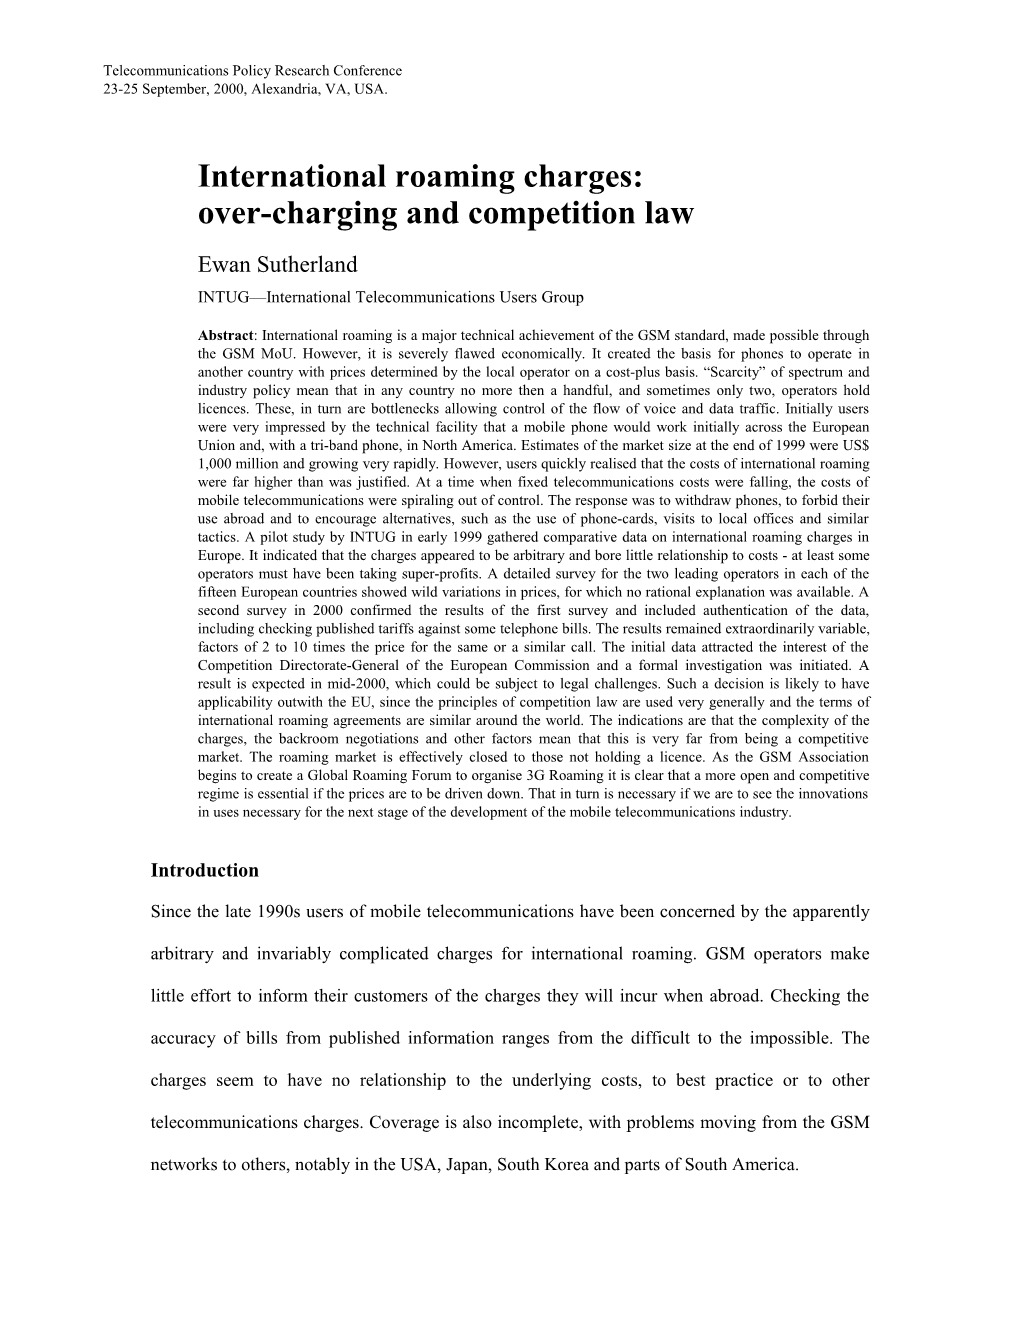 International Roaming Charges: Over-Charging and Competition Law